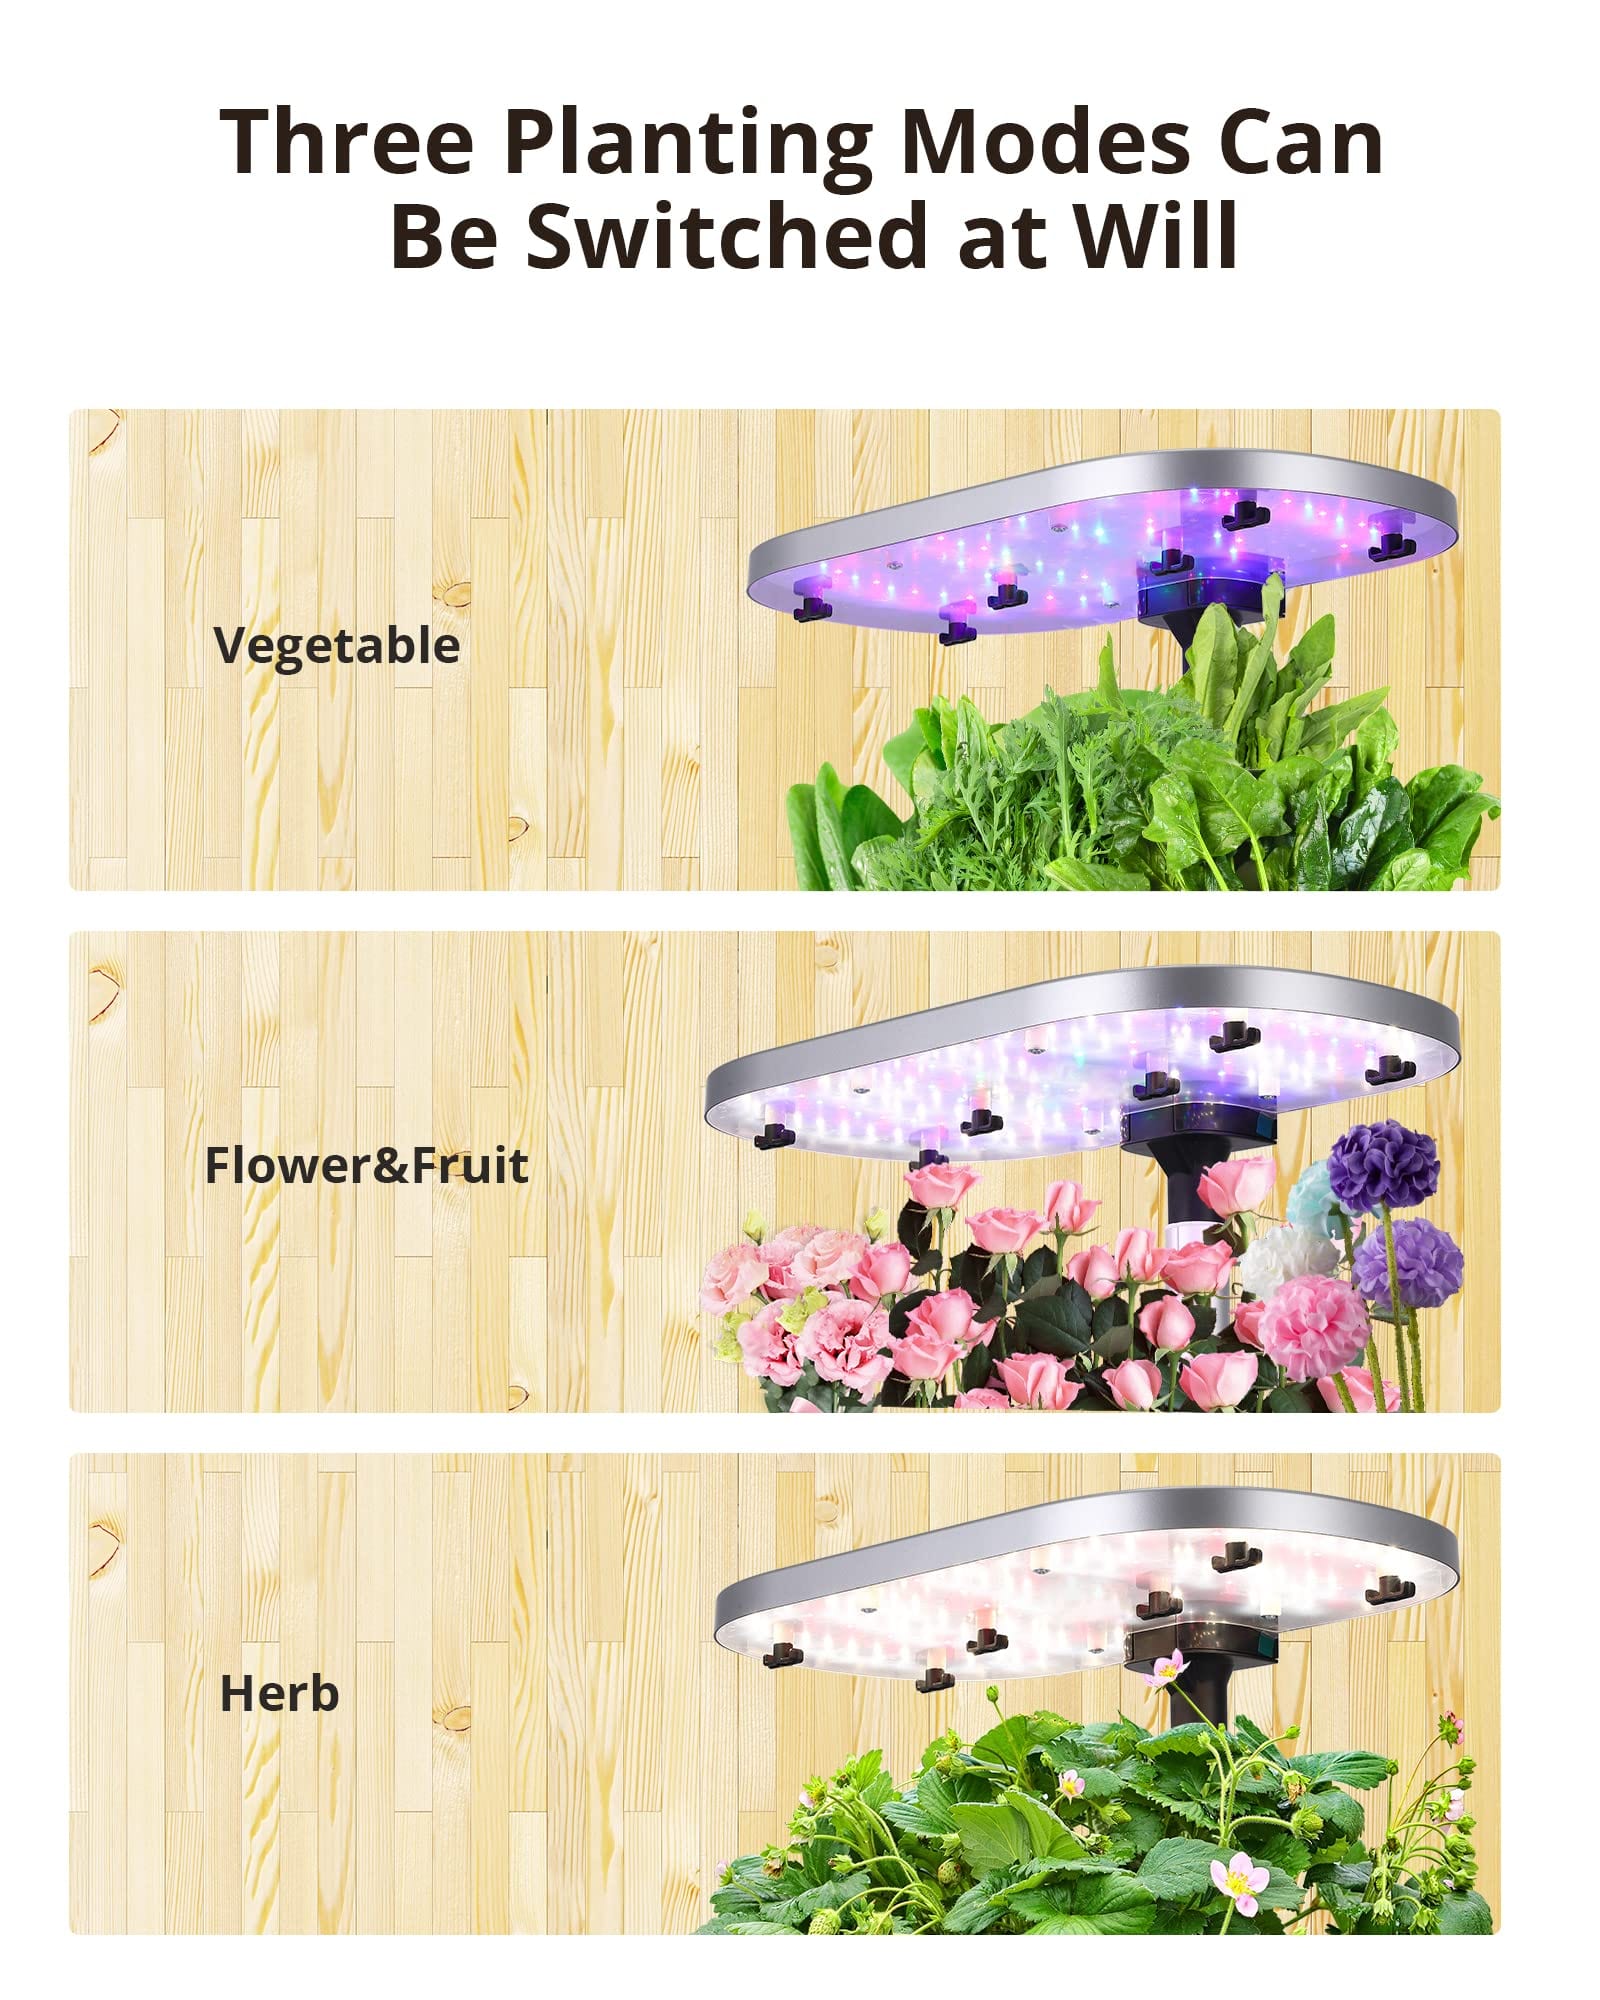 12 Pods Smart Hydroponics Growing System, 36W LED,APP Controlled - GARVEE